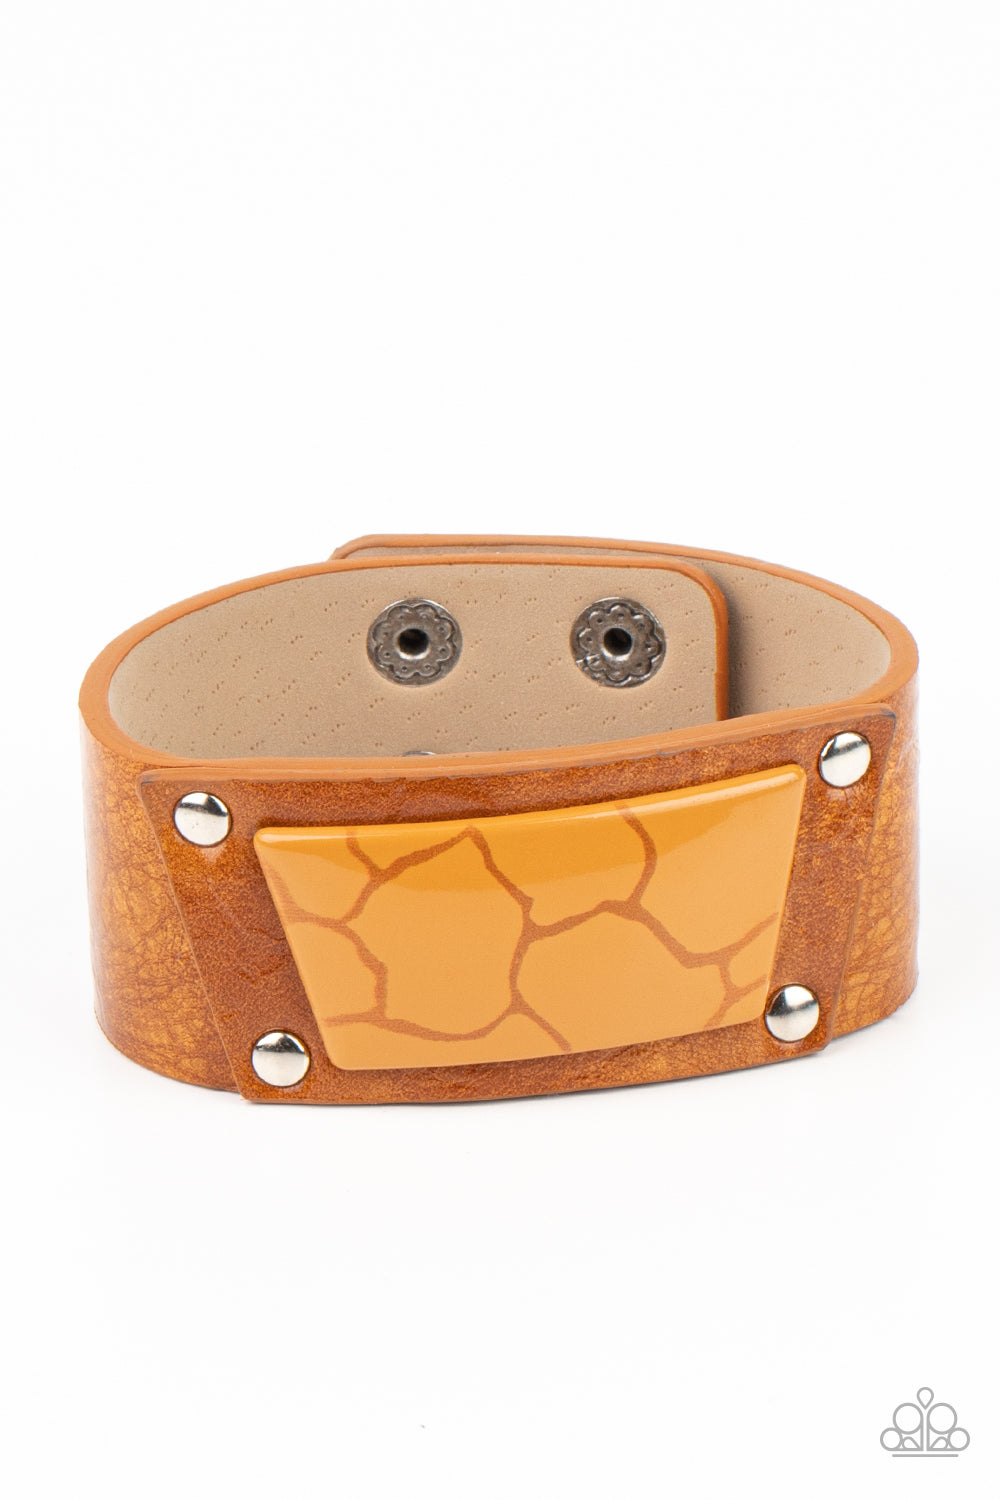 Geo Glamper Brown Wrap Bracelet - Paparazzi Accessories  Featuring a faux marble finish, a brown acrylic centerpiece attaches to a tan leather frame that is studded in place along a distressed tan leather band for a colorfully rustic fashion. Features an adjustable snap closure.  Sold as one individual bracelet.